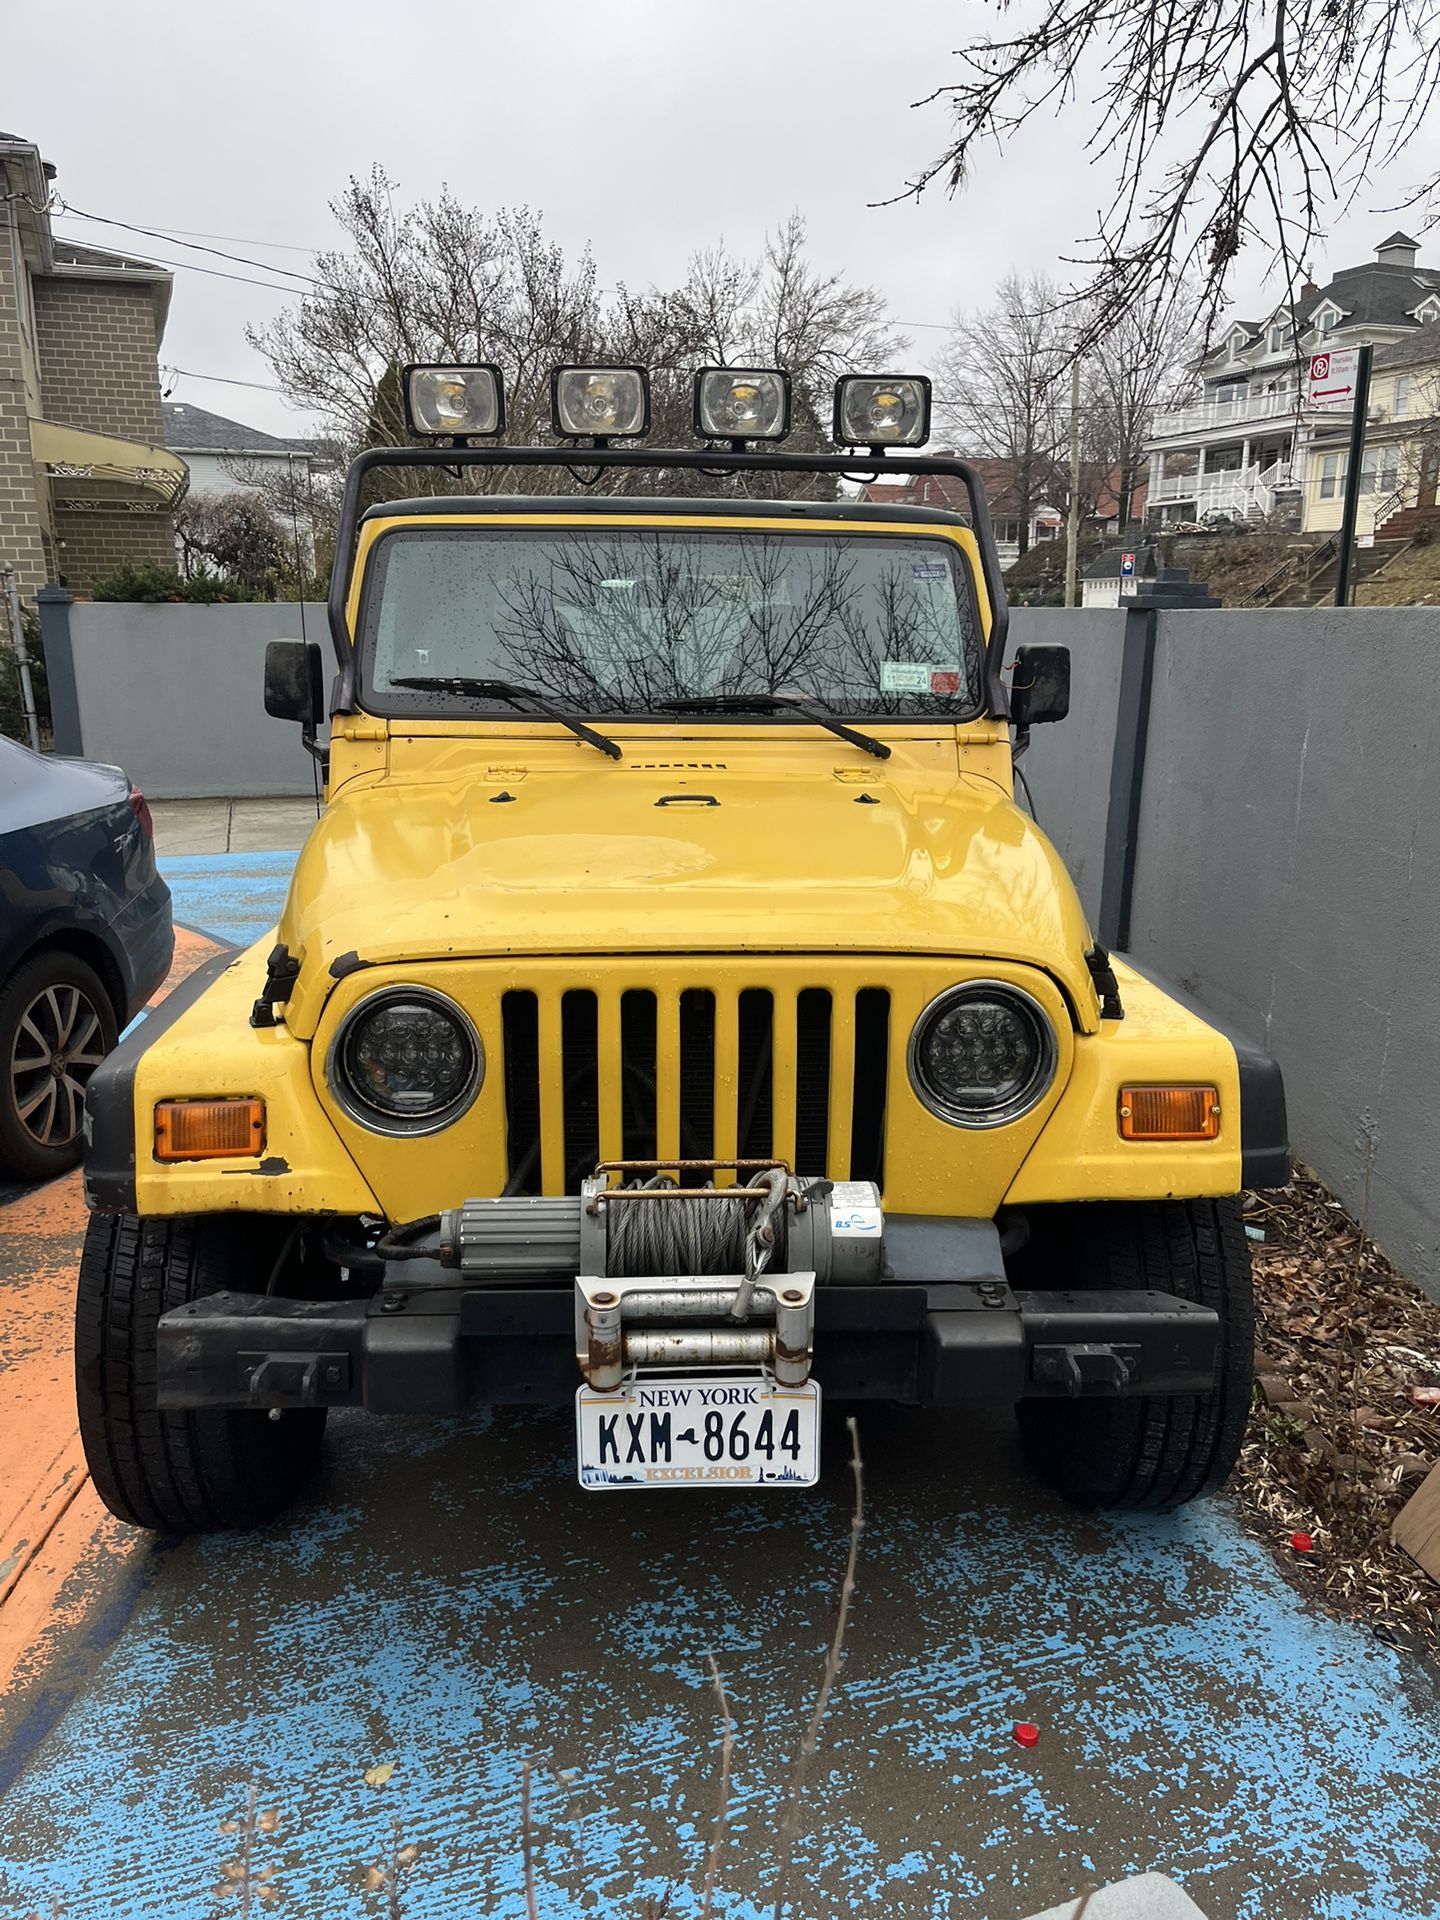 2000 Jeep Wrangler for Sale in Queens, NY - OfferUp